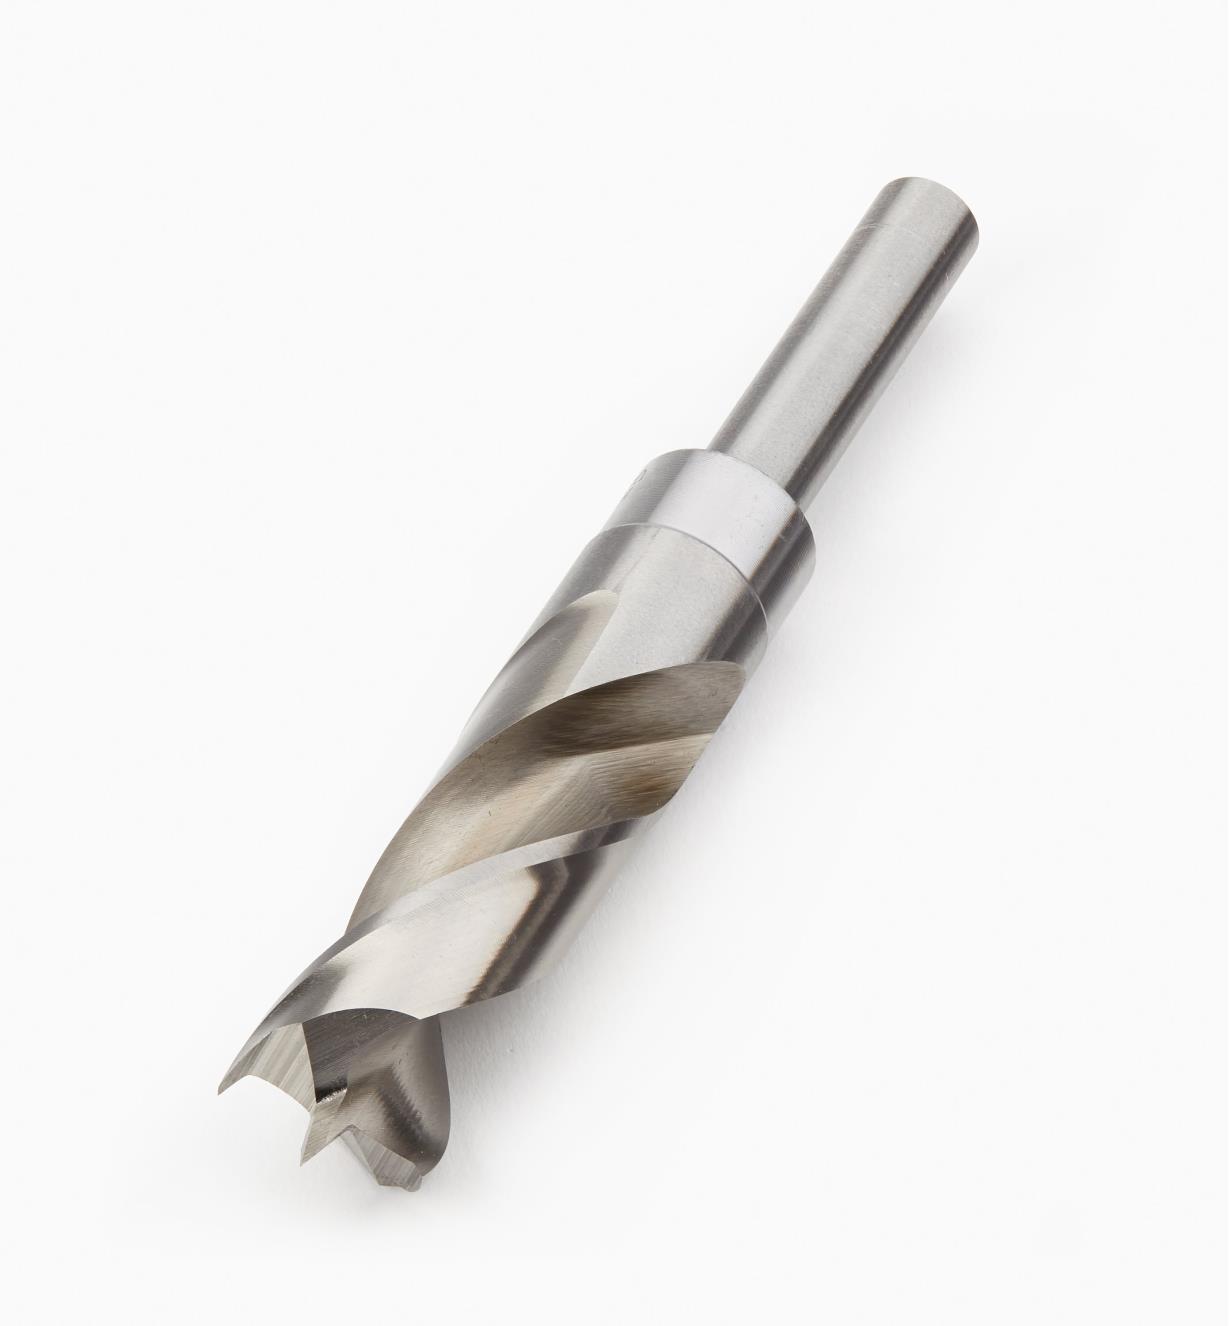 Lip & spur wood drill bit 15mm brad point for clean holes in wood and board 